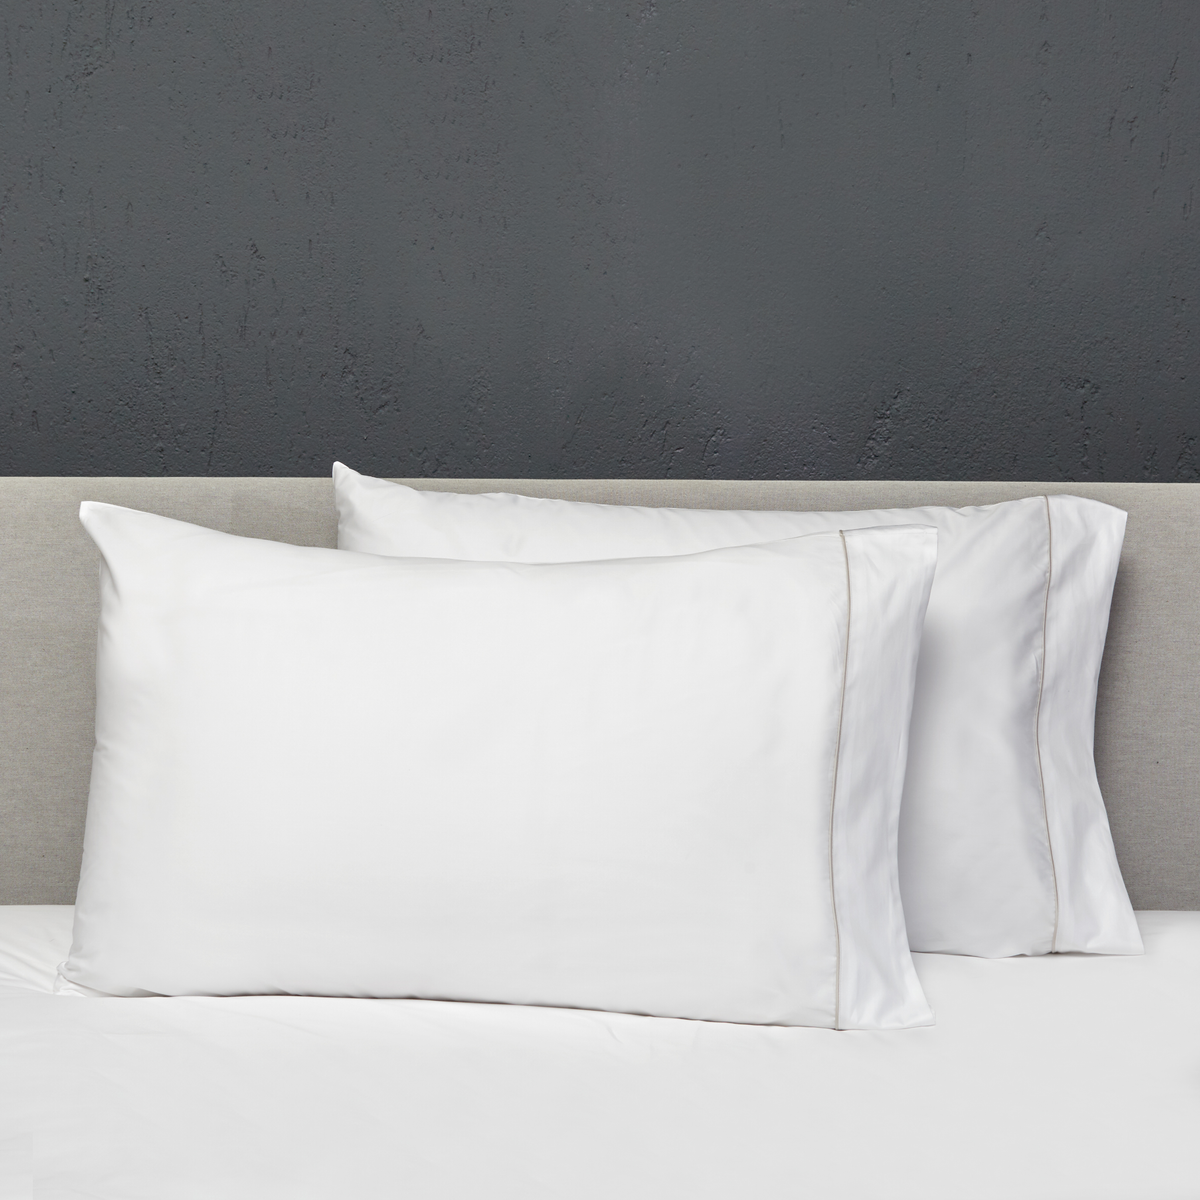 Pair of Pillowcases of Signoria Luce Bedding in Pearl Color